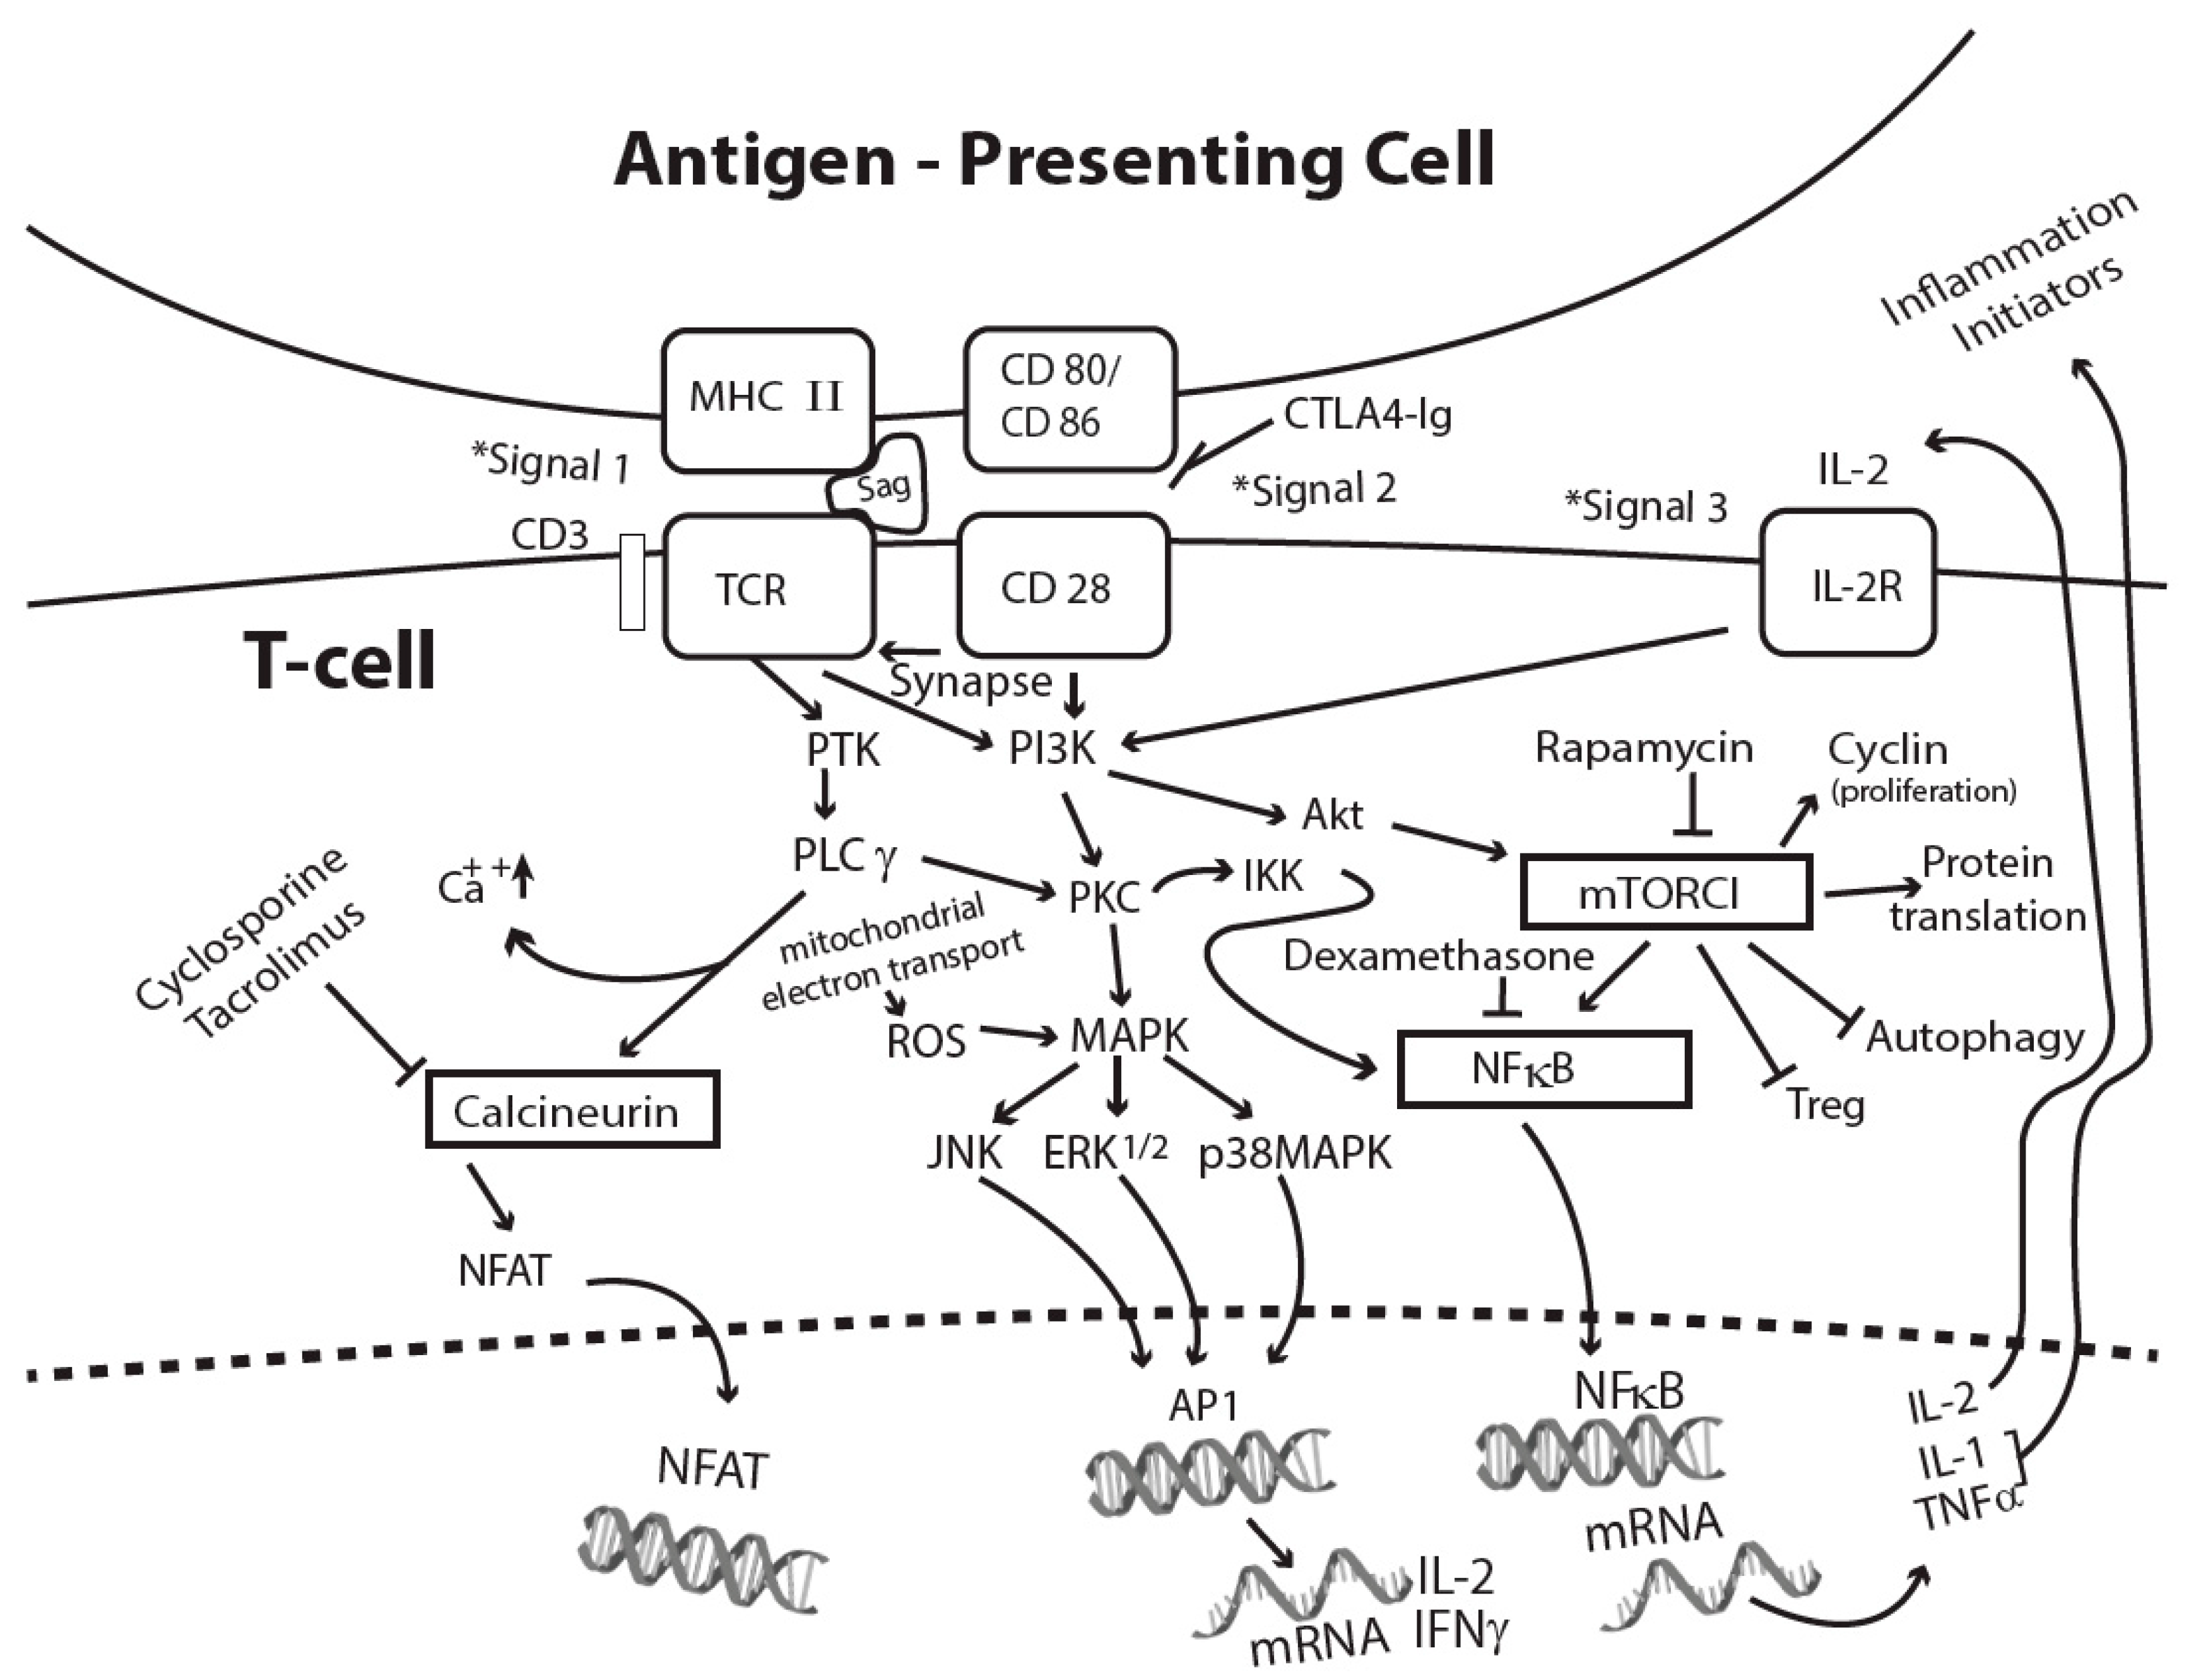 Superantigens: a brief review with special emphasis on dermatologic diseases